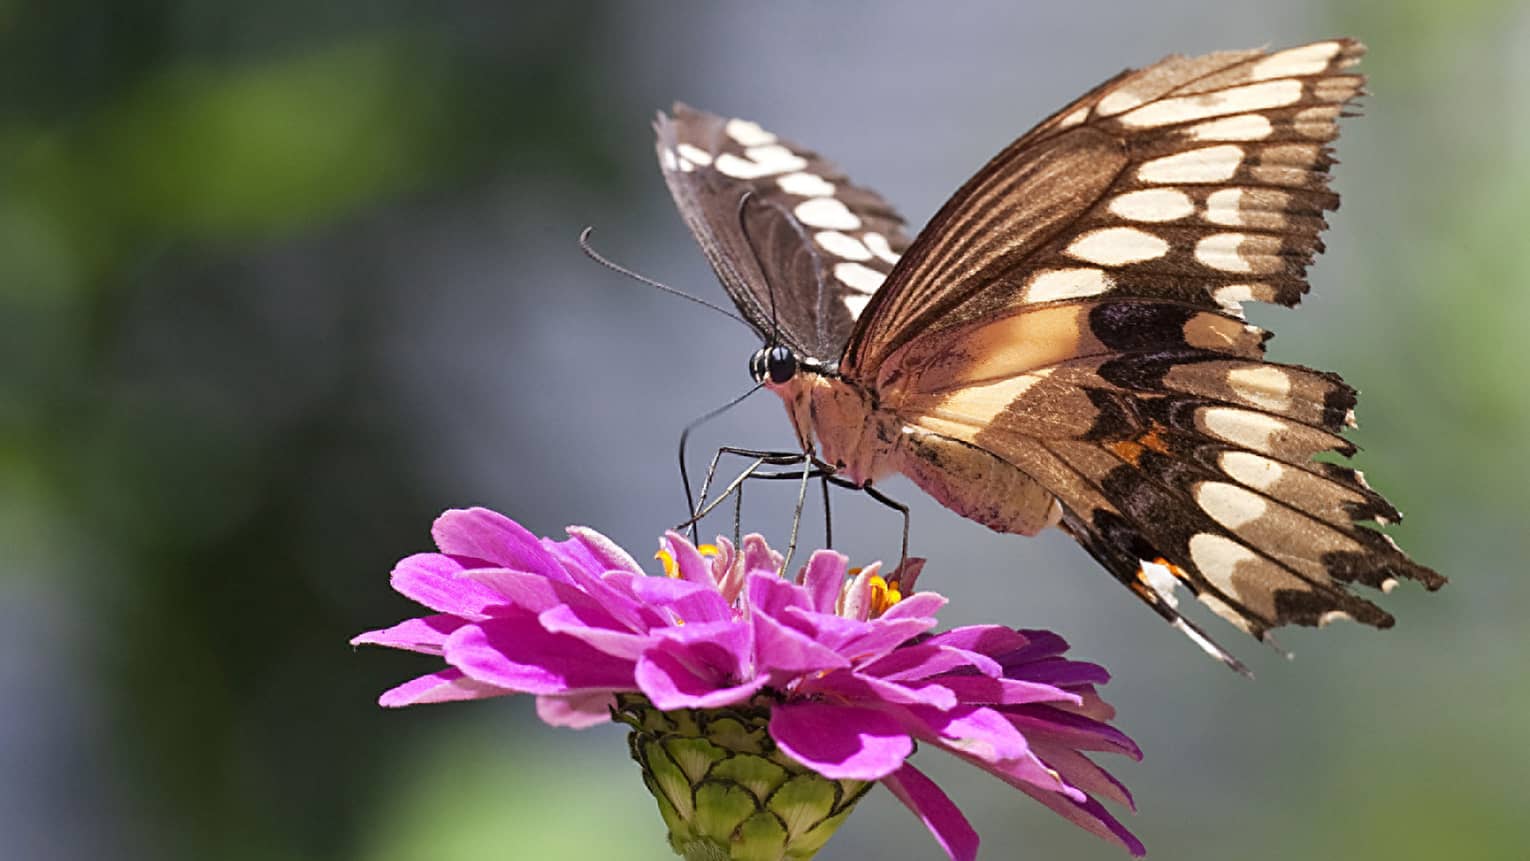 Butterfly that landed on a pink flower.